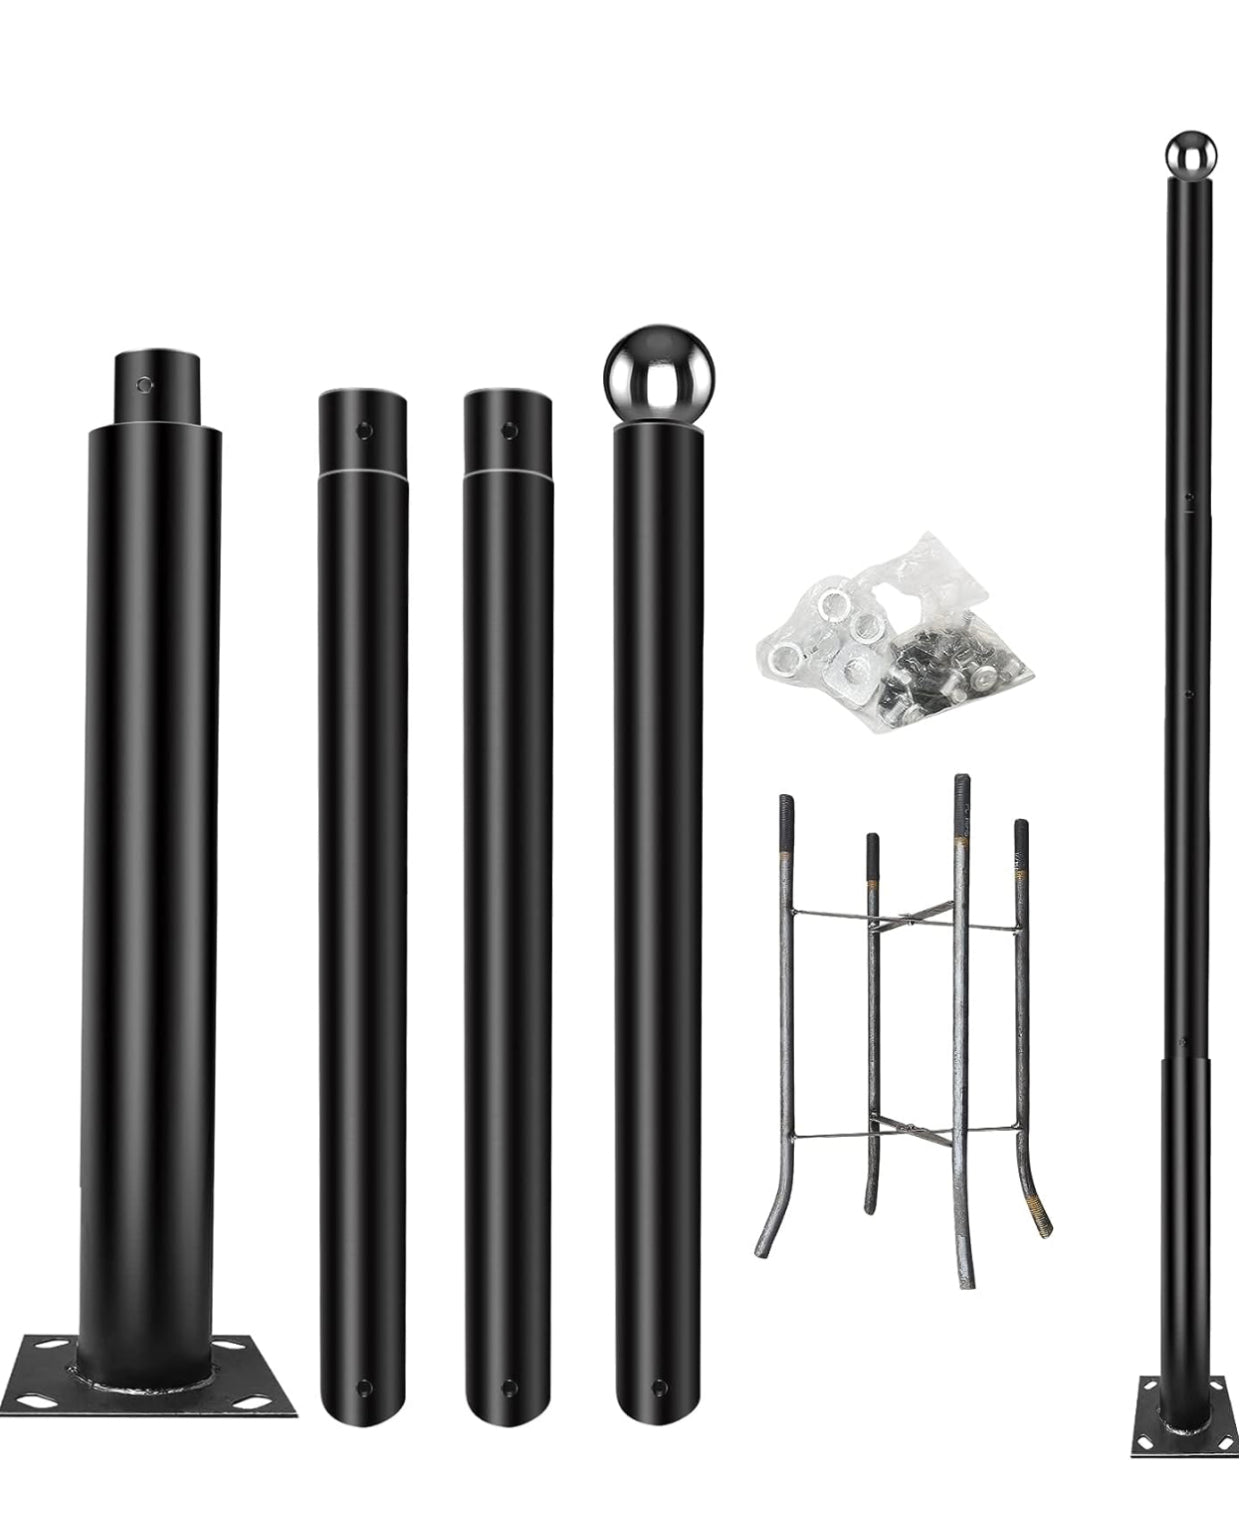 13FT Street Light Pole Garden Light Heavy Metal Light Pole Black Iron Aluminum Pole with Ground Cage and Mounting Kit for Heavy Duty